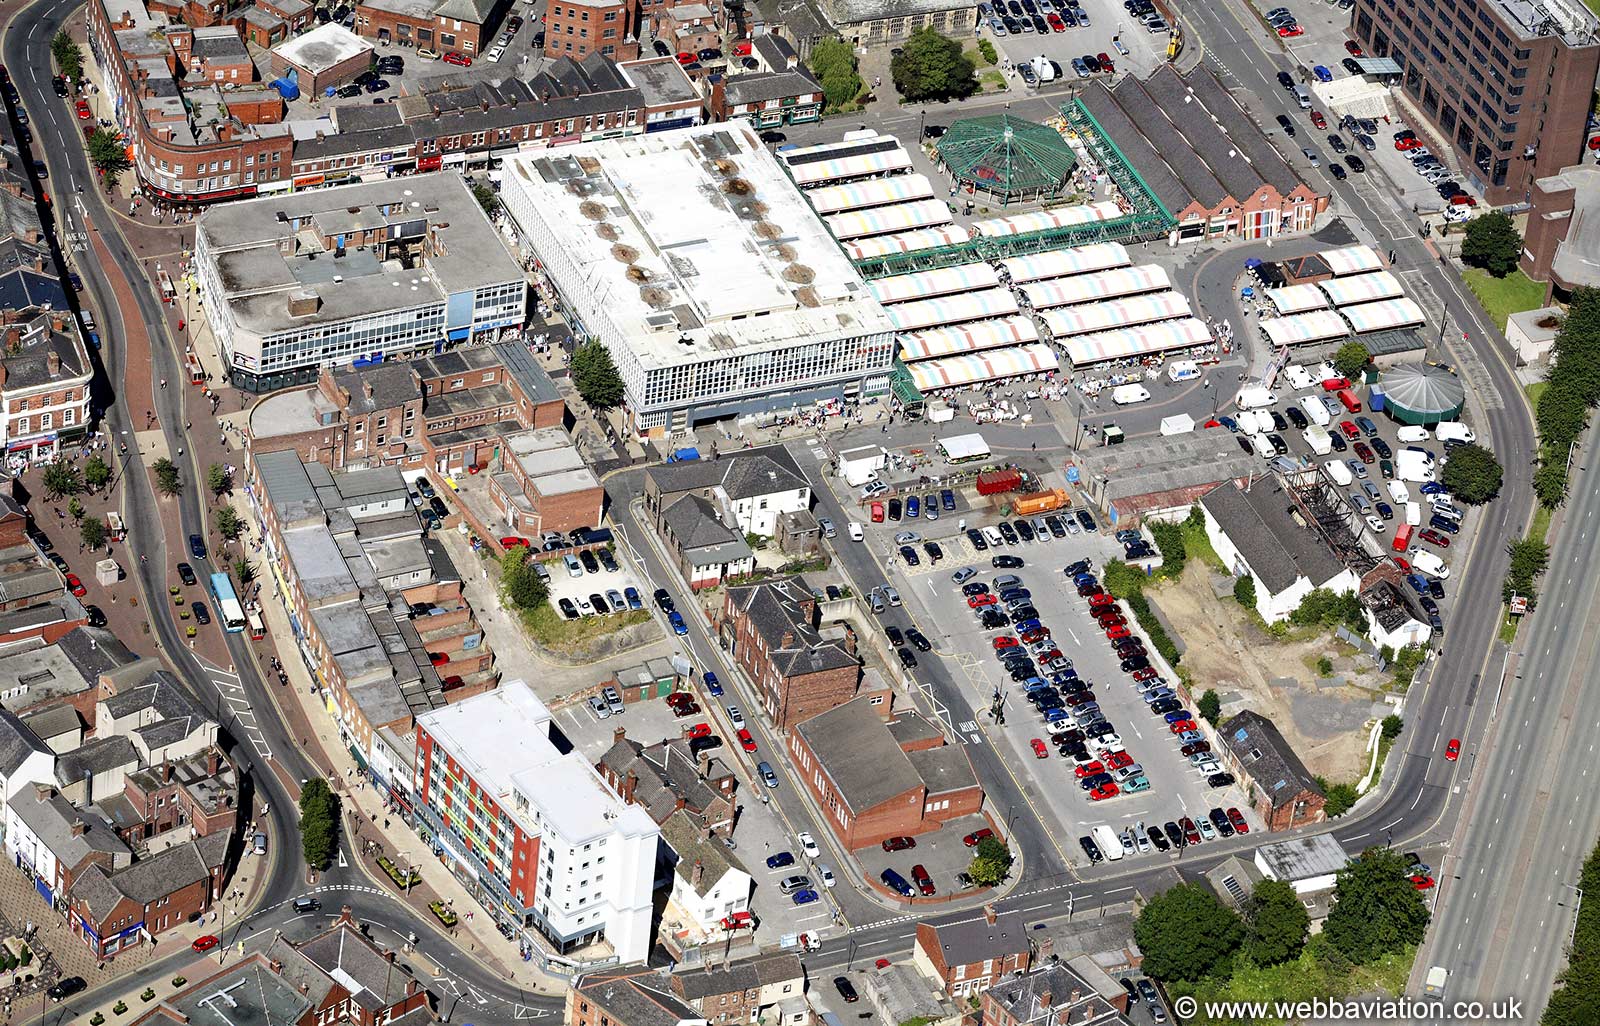  the old Wakefield market area taken in 2007 before it was replaced with  Trinity Walk  shopping centre, Wakefield from the air 